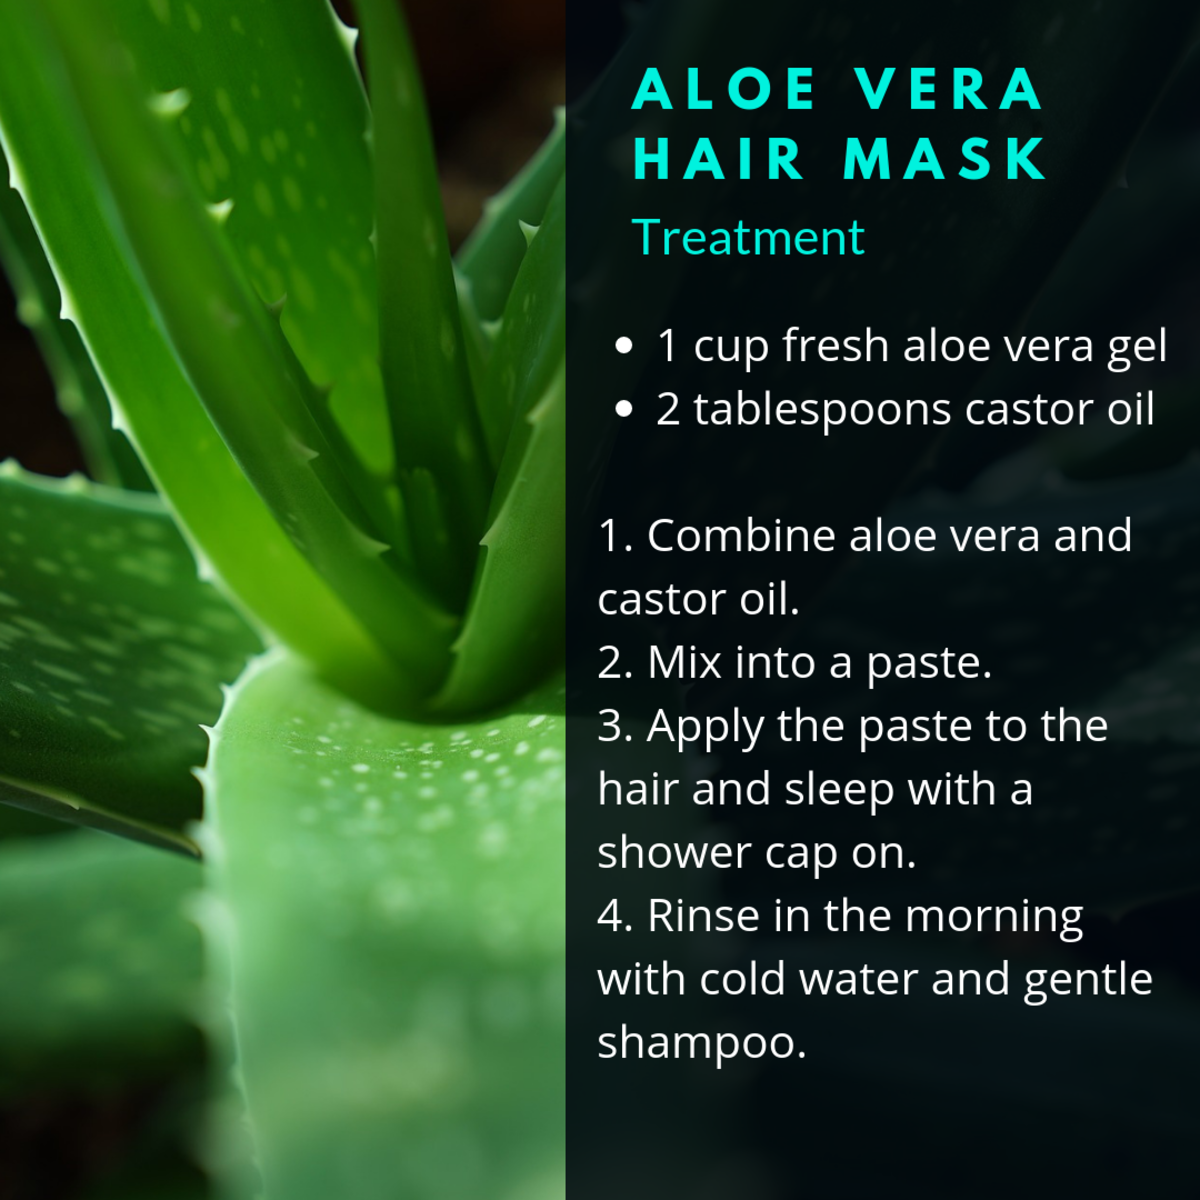 Aloe very helps to a hydrate a dry scalp.